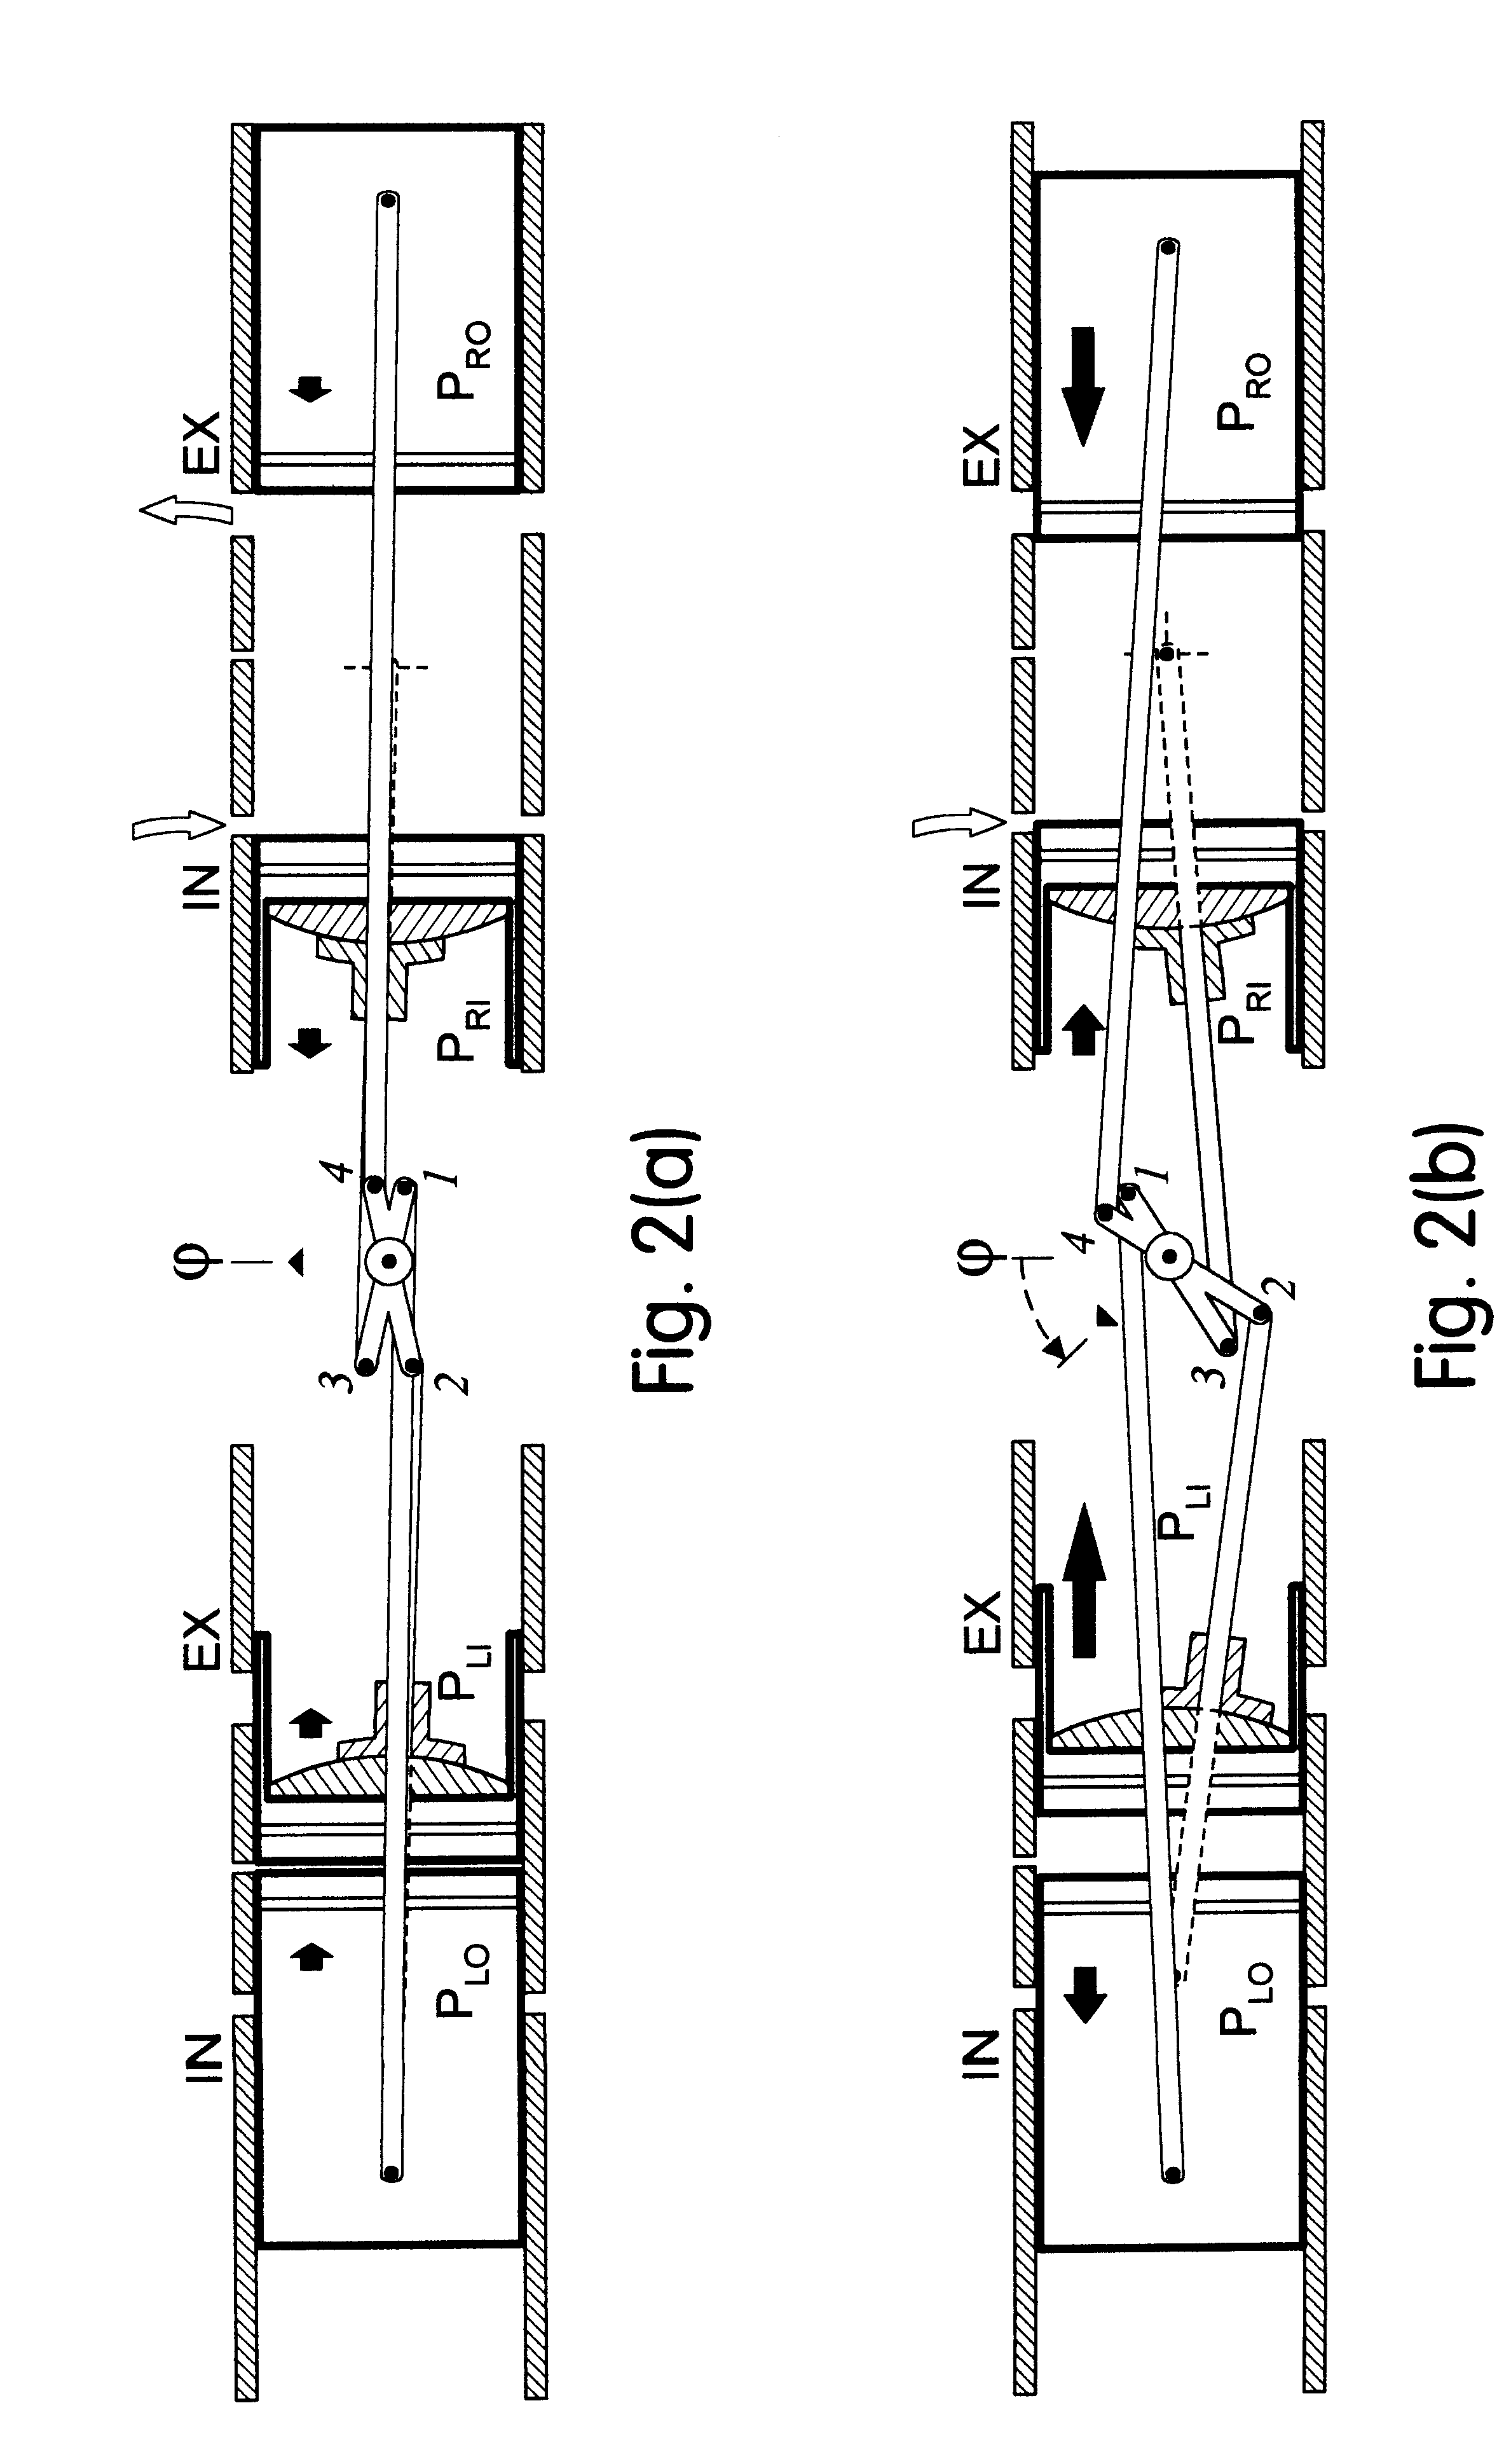 Internal combustion engine with a single crankshaft and having opposed cylinders with opposed pistons